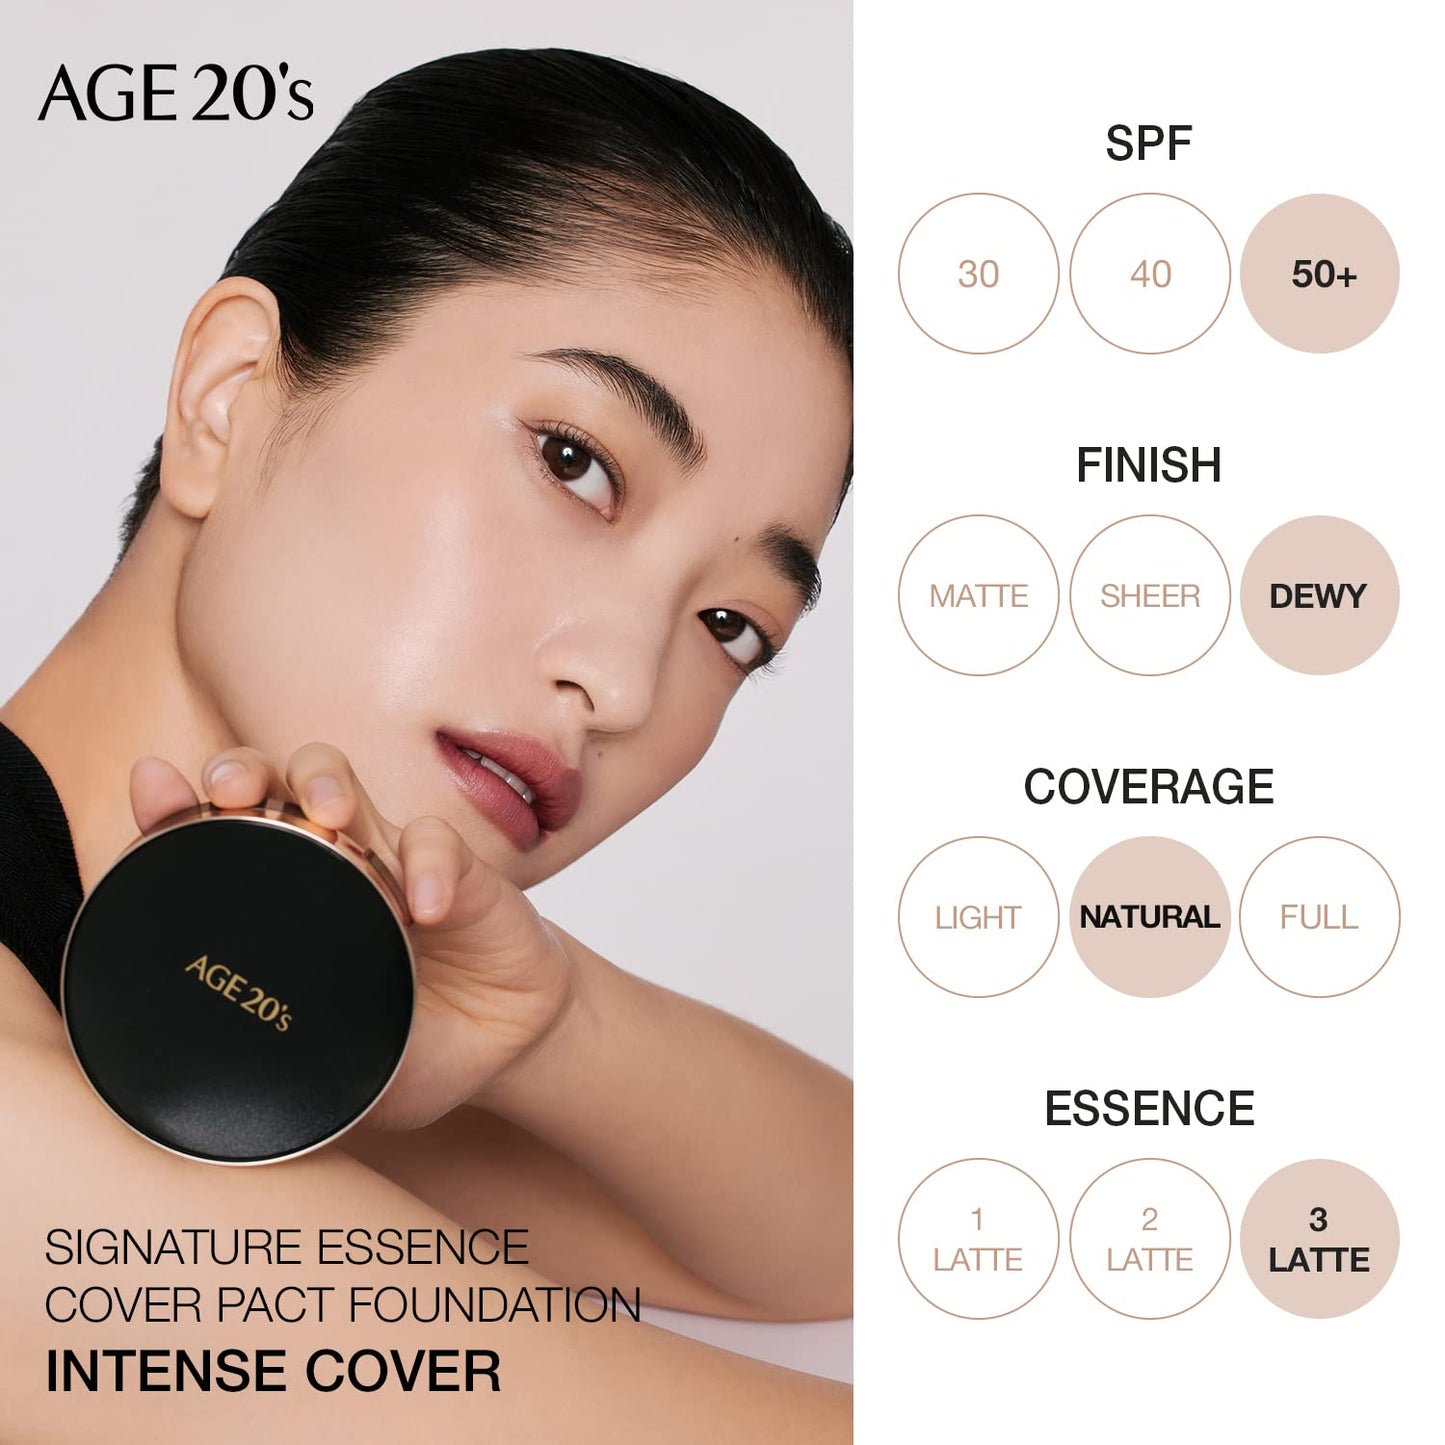 Korean Cushion Foundation Makeup Full Coverage SPF 50+, 2 Refills Included